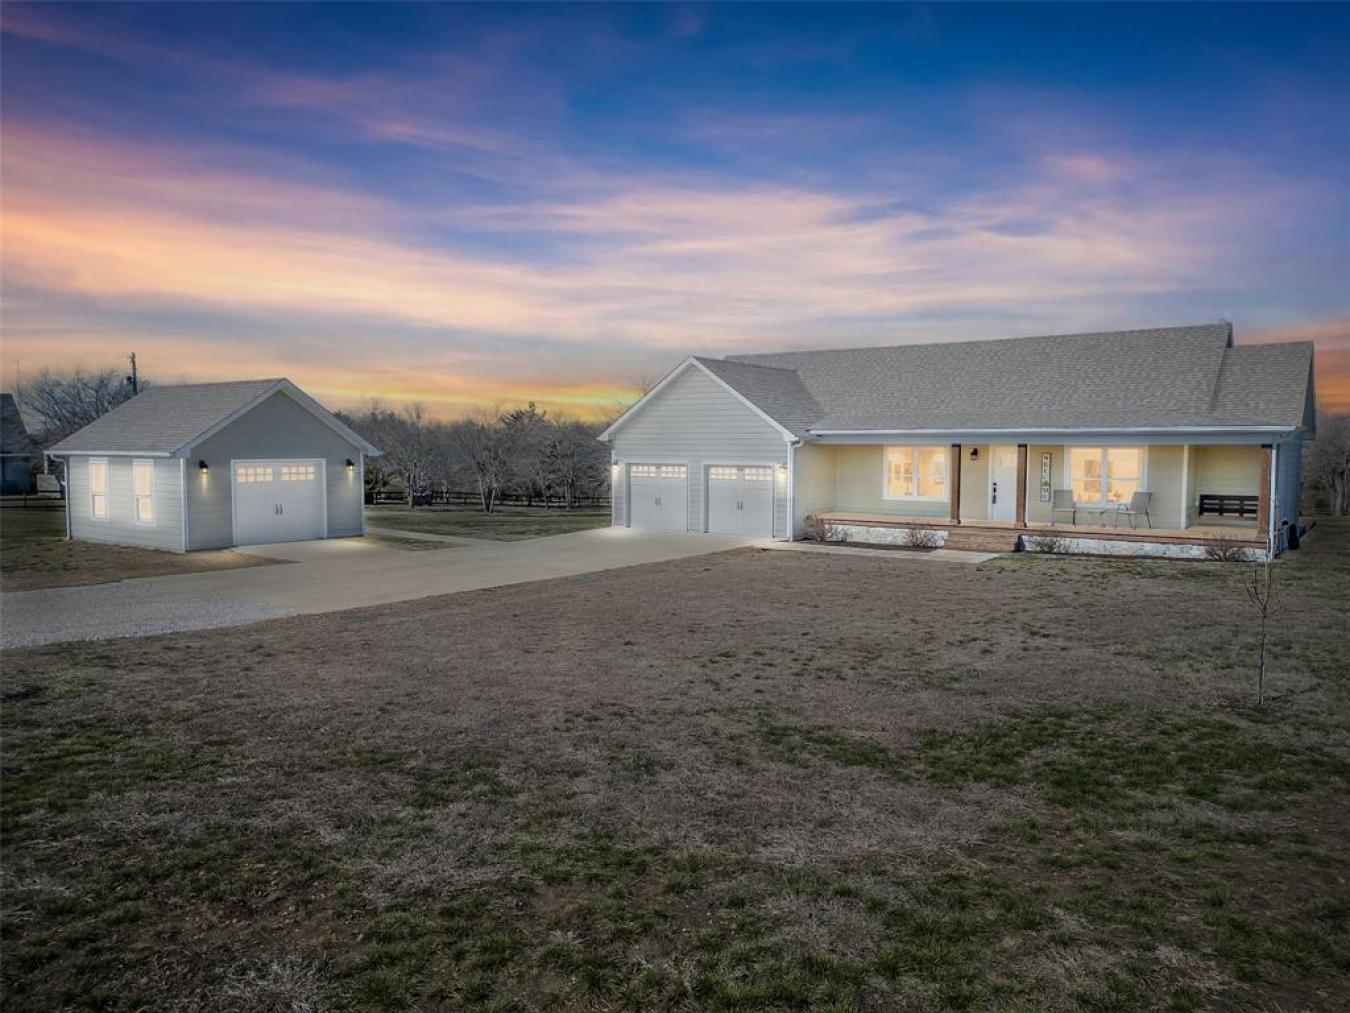 414 White Oak, Anna, Texas, 75409, United States, 3 Bedrooms Bedrooms, ,3 BathroomsBathrooms,Residential,For Sale,414 White Oak,1497246